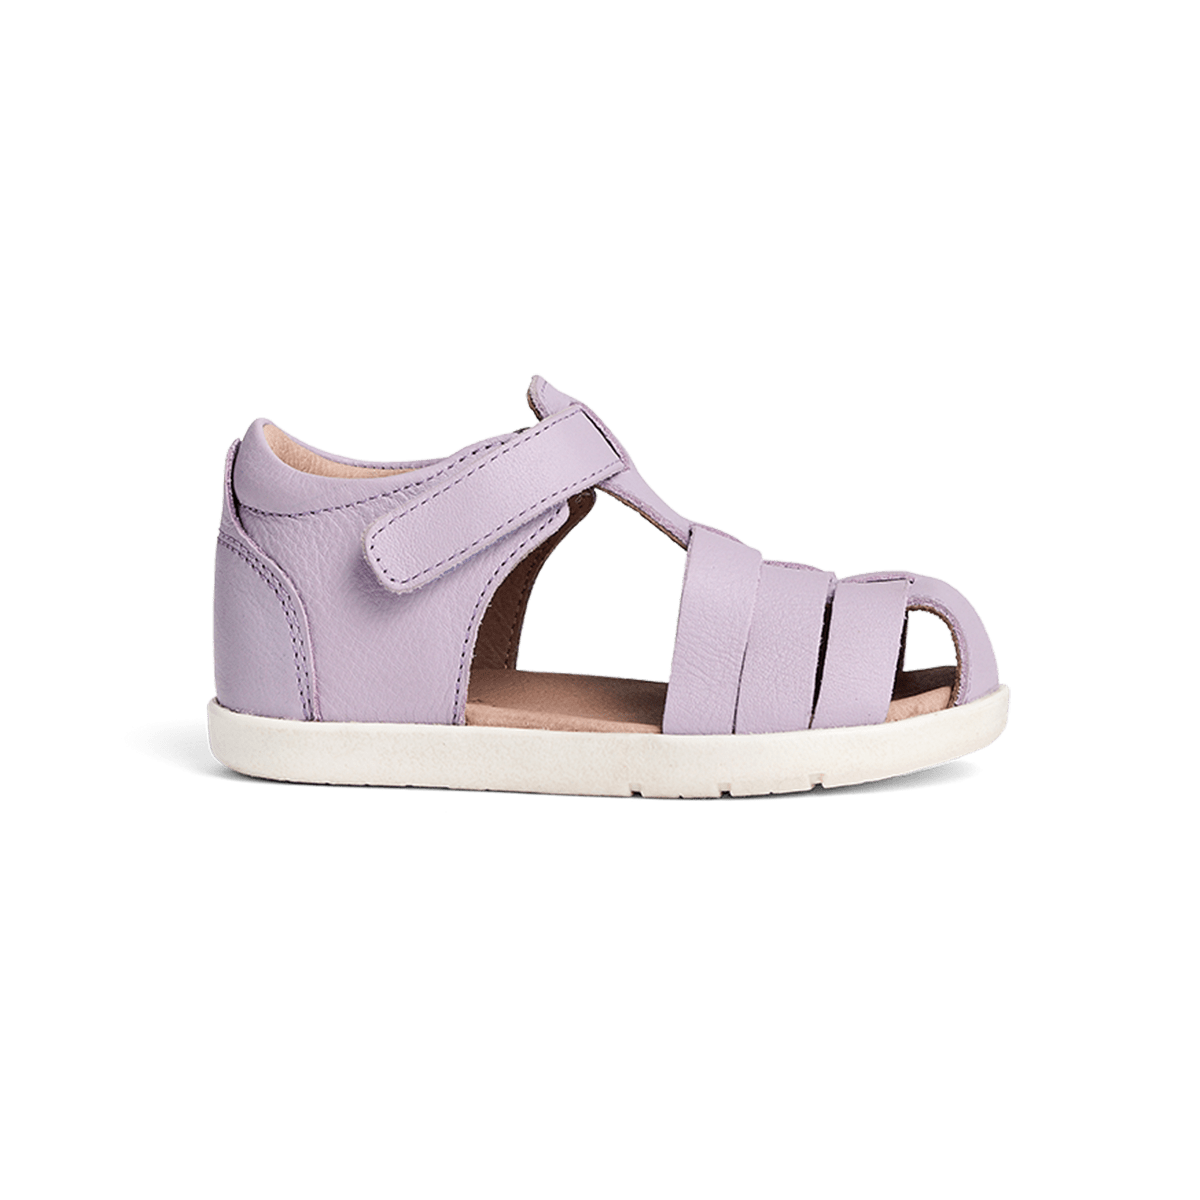 Pretty Brave Girls Shoes Billie Sandal in Lilac